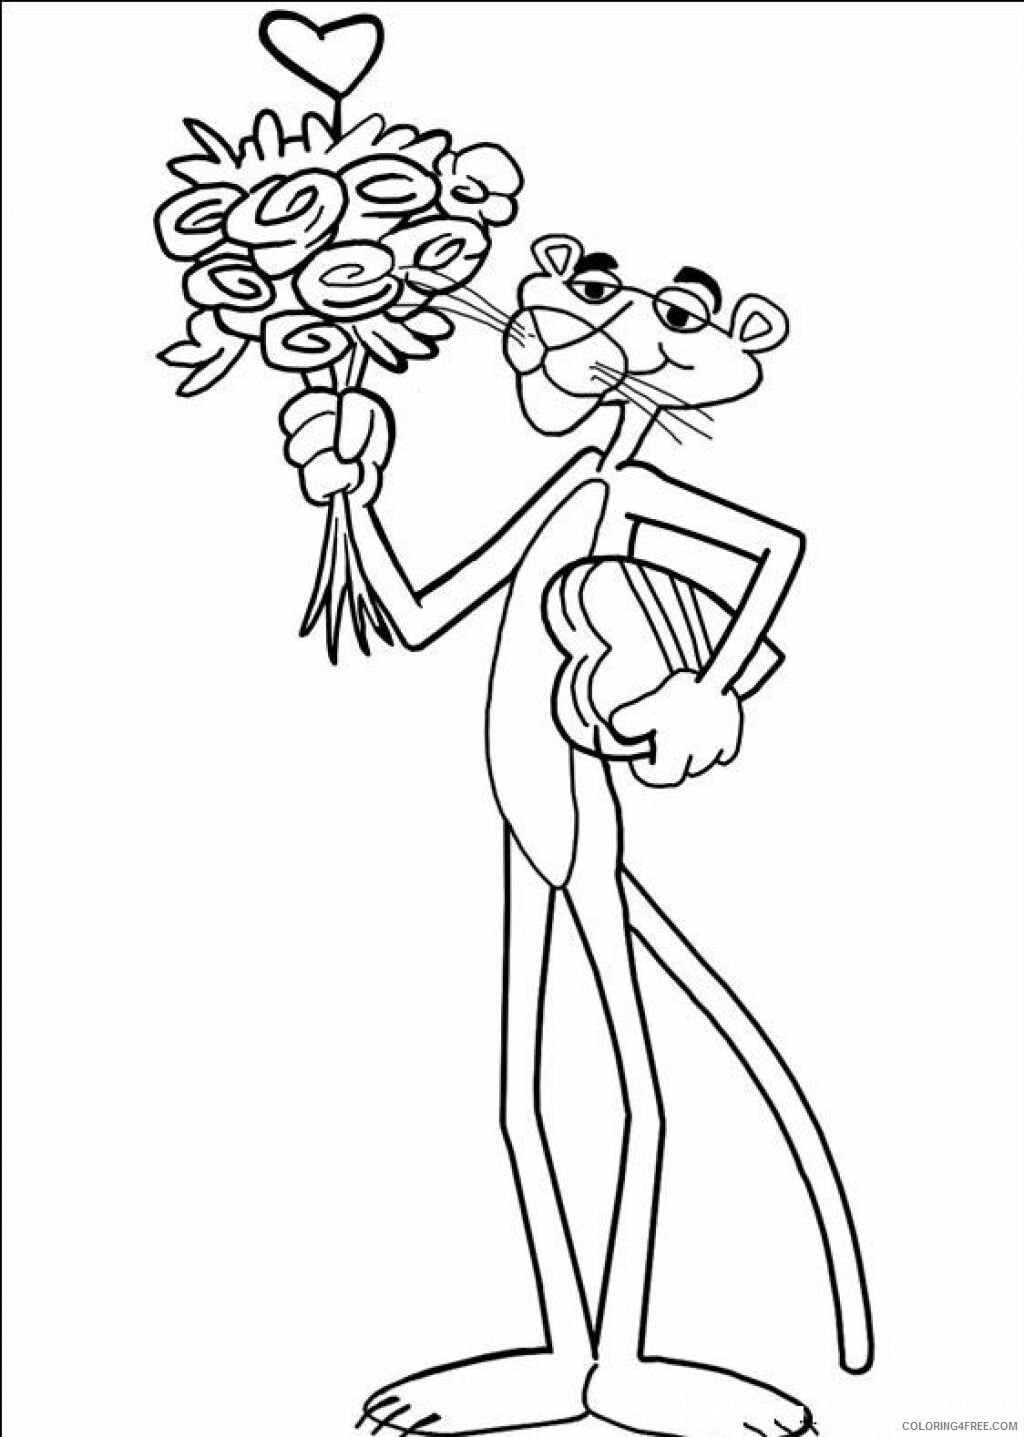 Pink Panther Coloring Pages TV Film Pink Panther With Flowers 2020 06305 Coloring4free